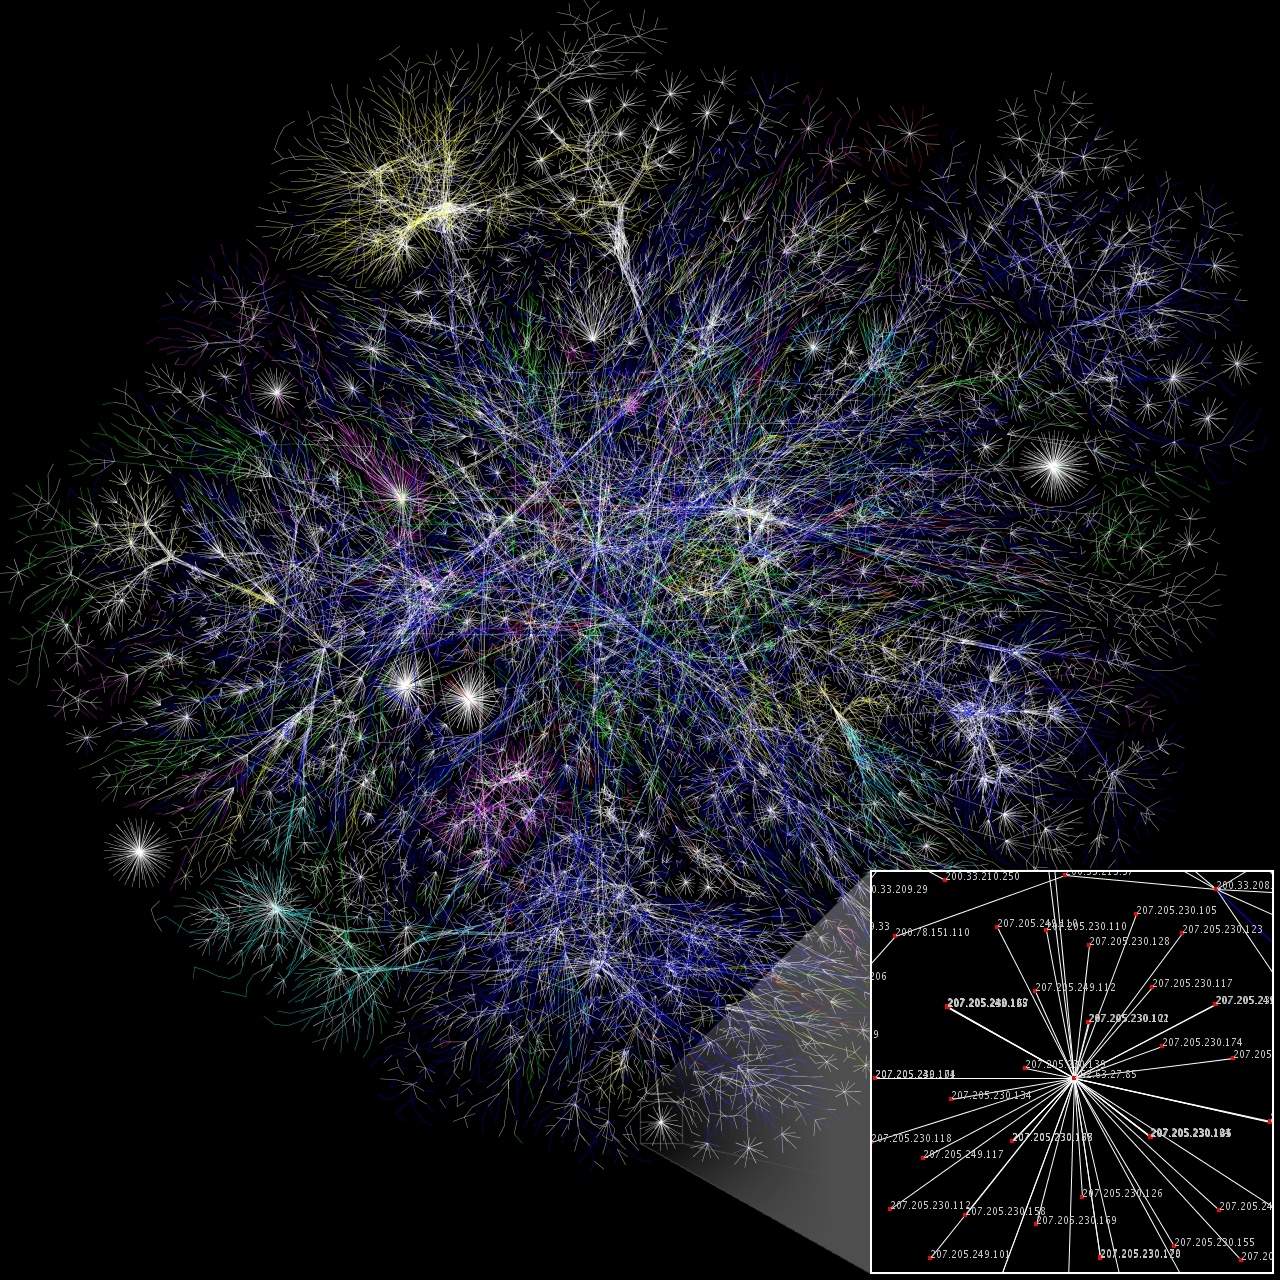 internet network map representing all the IP addresses